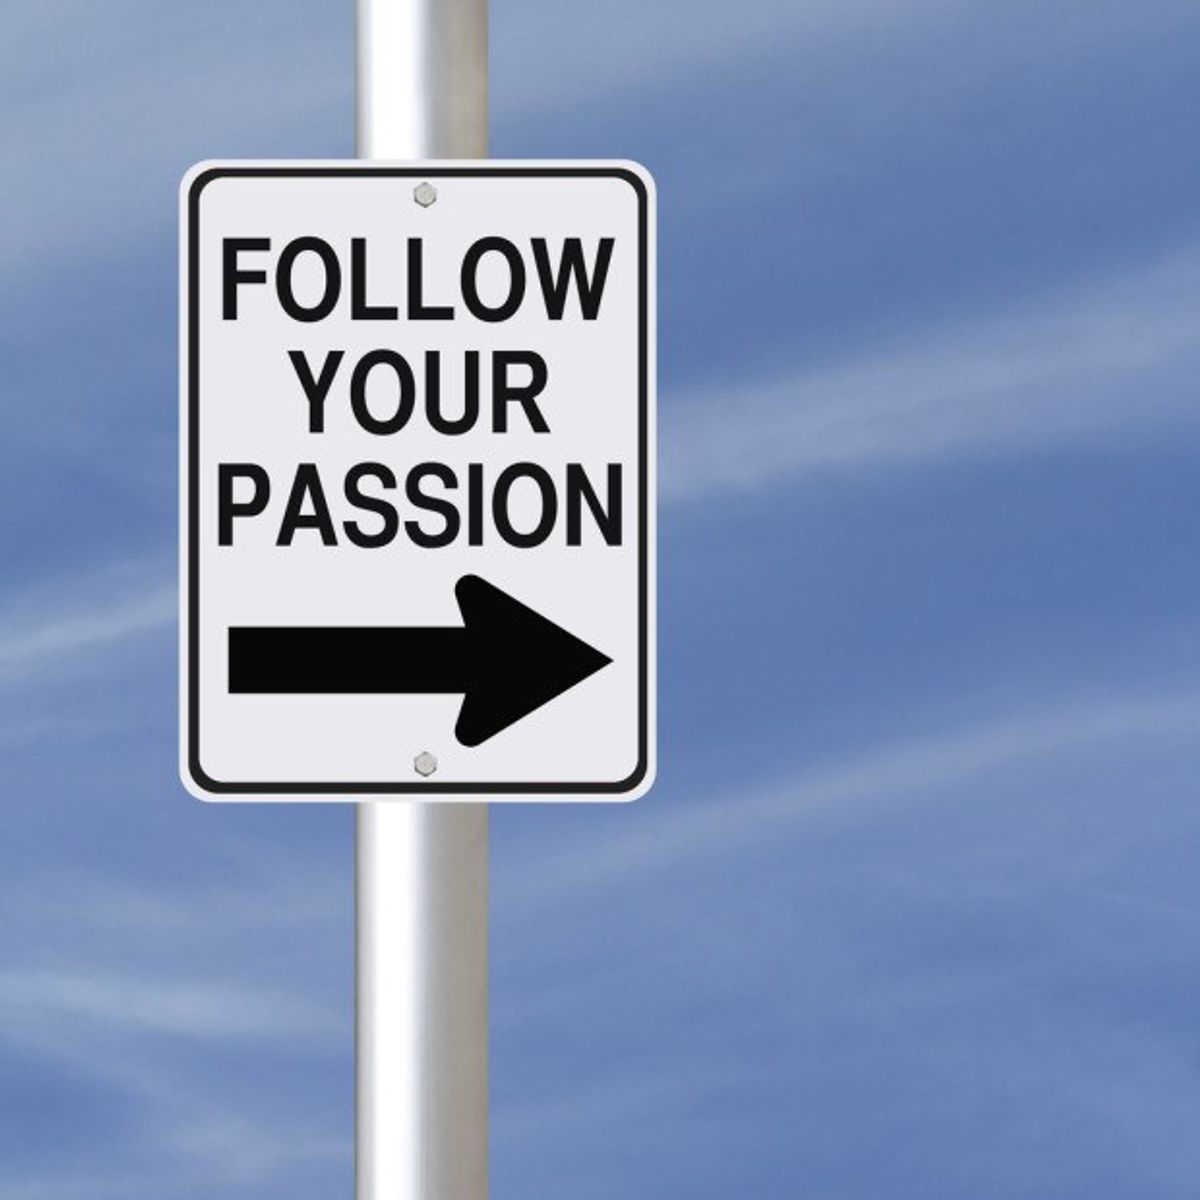 Your Passion Is The "Right" College Major